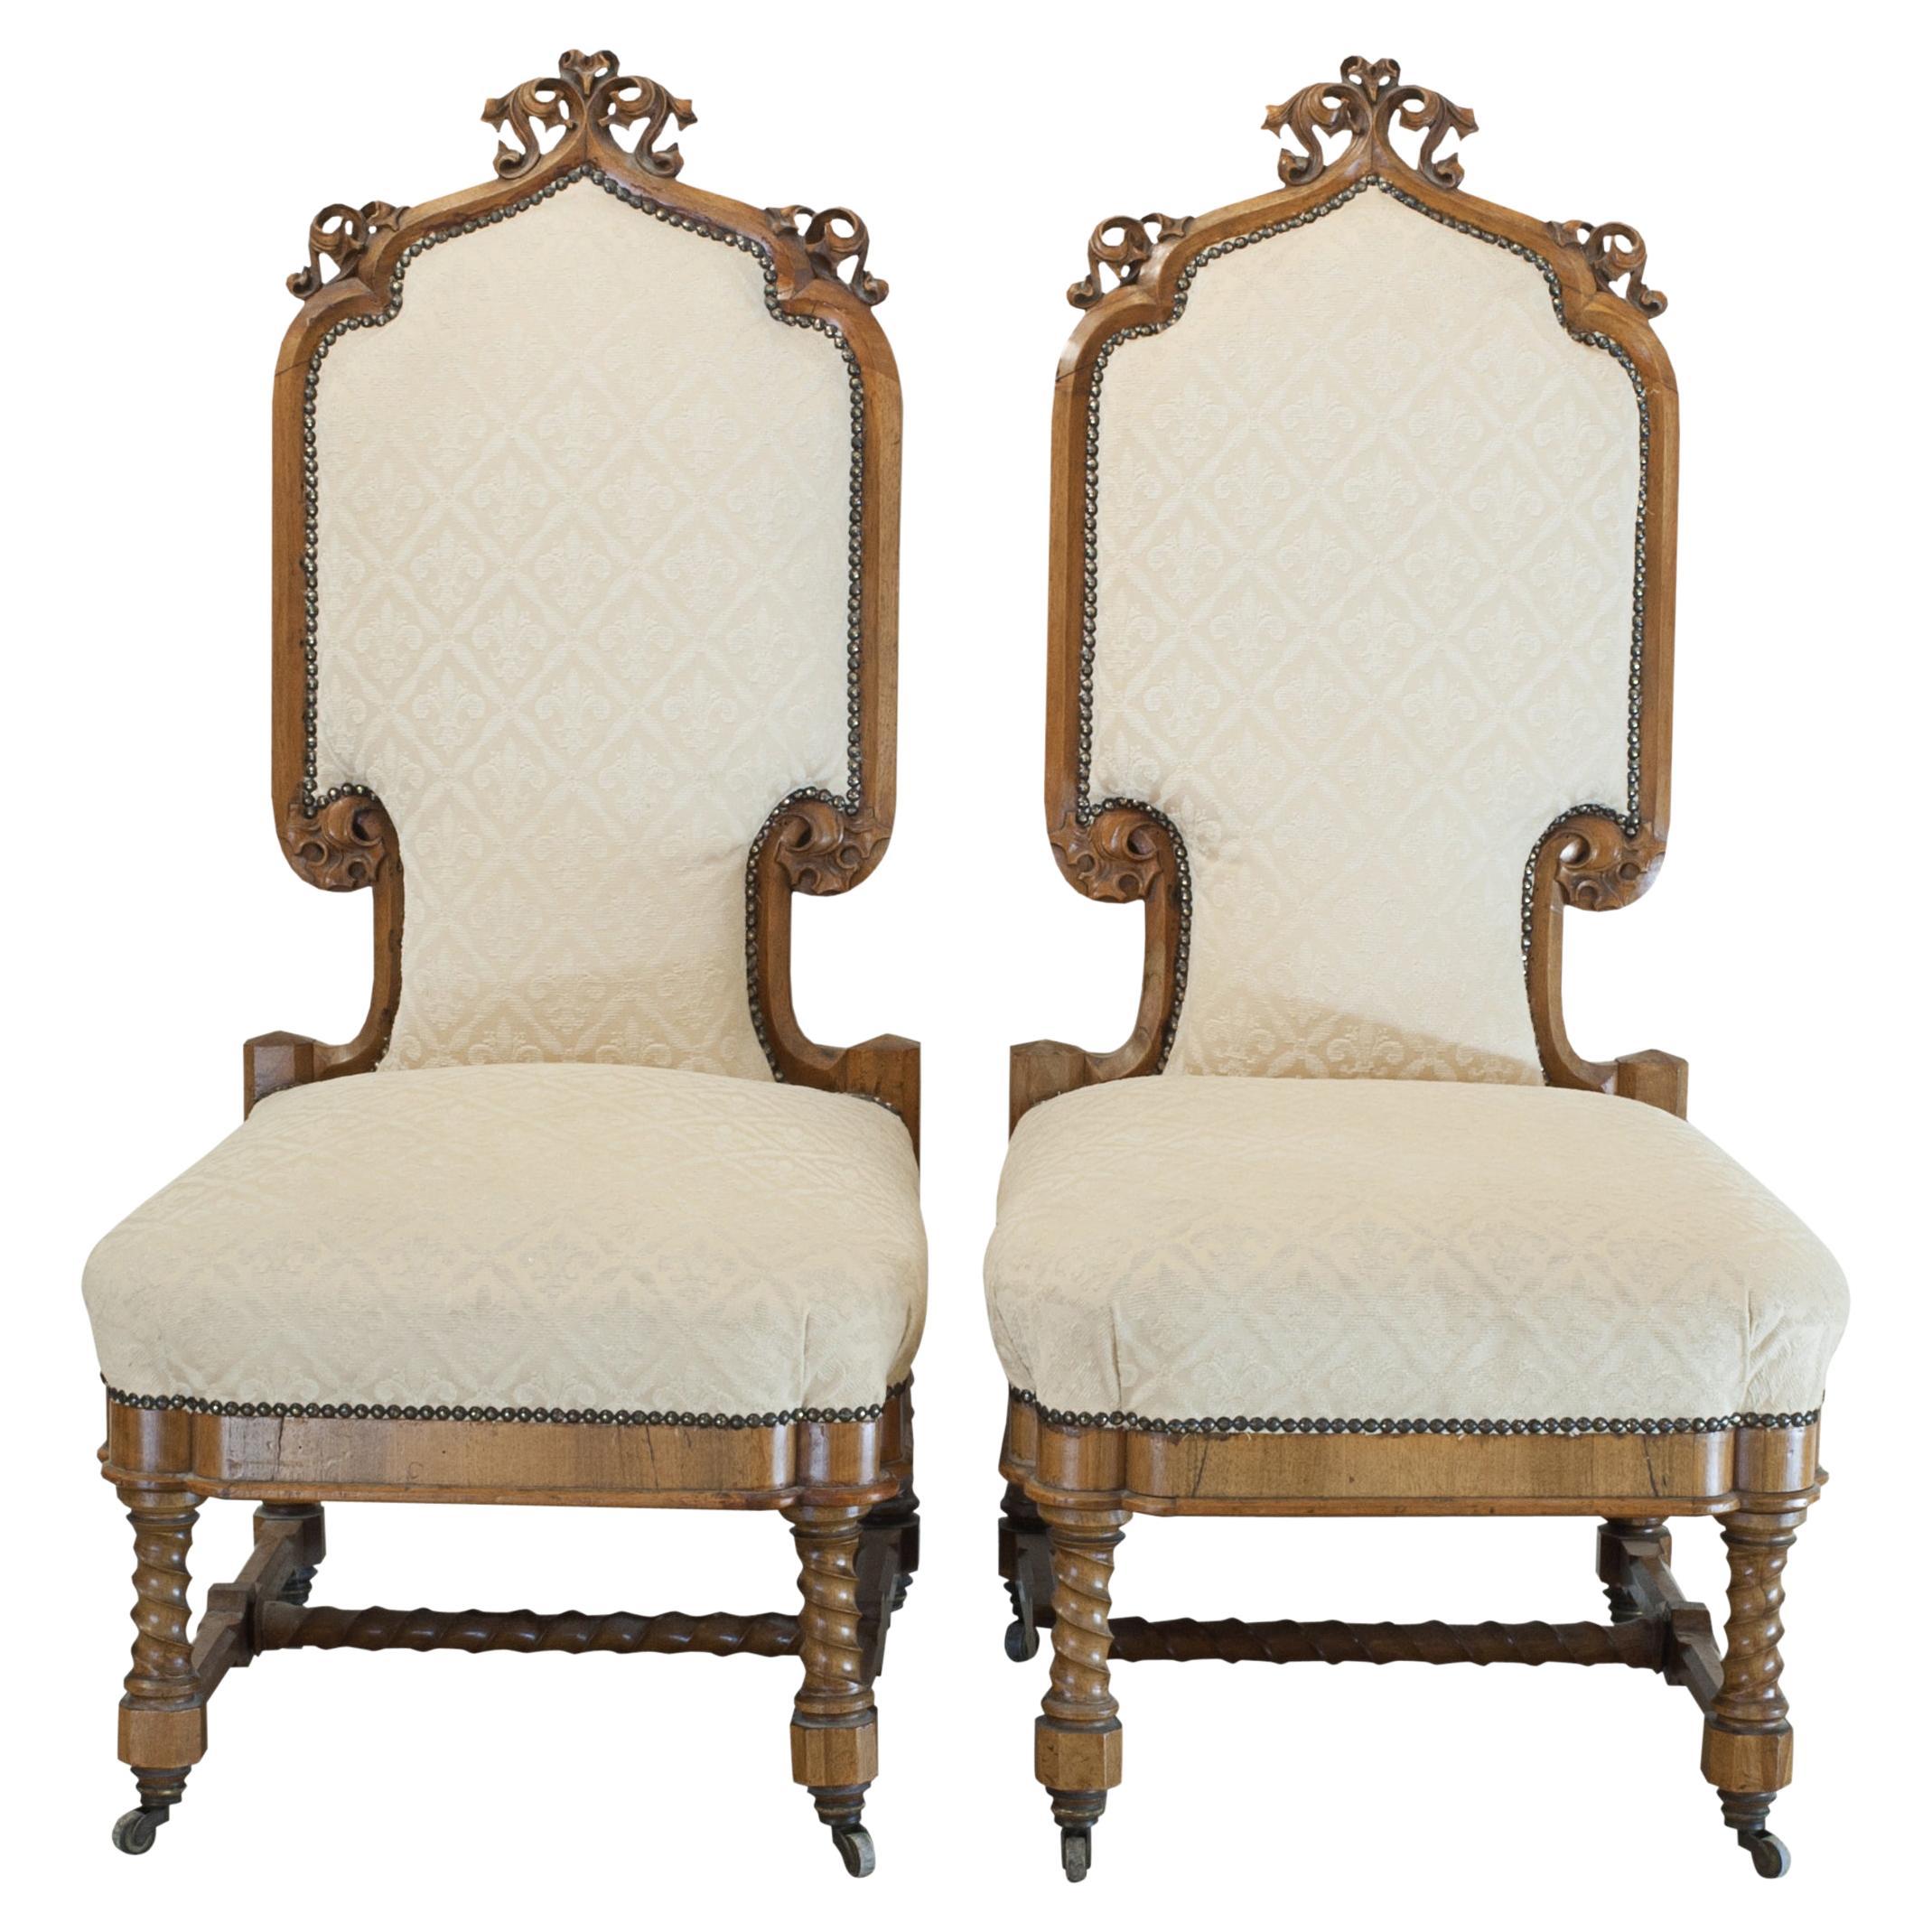 Pair of Carved Upholstered Hall Chairs